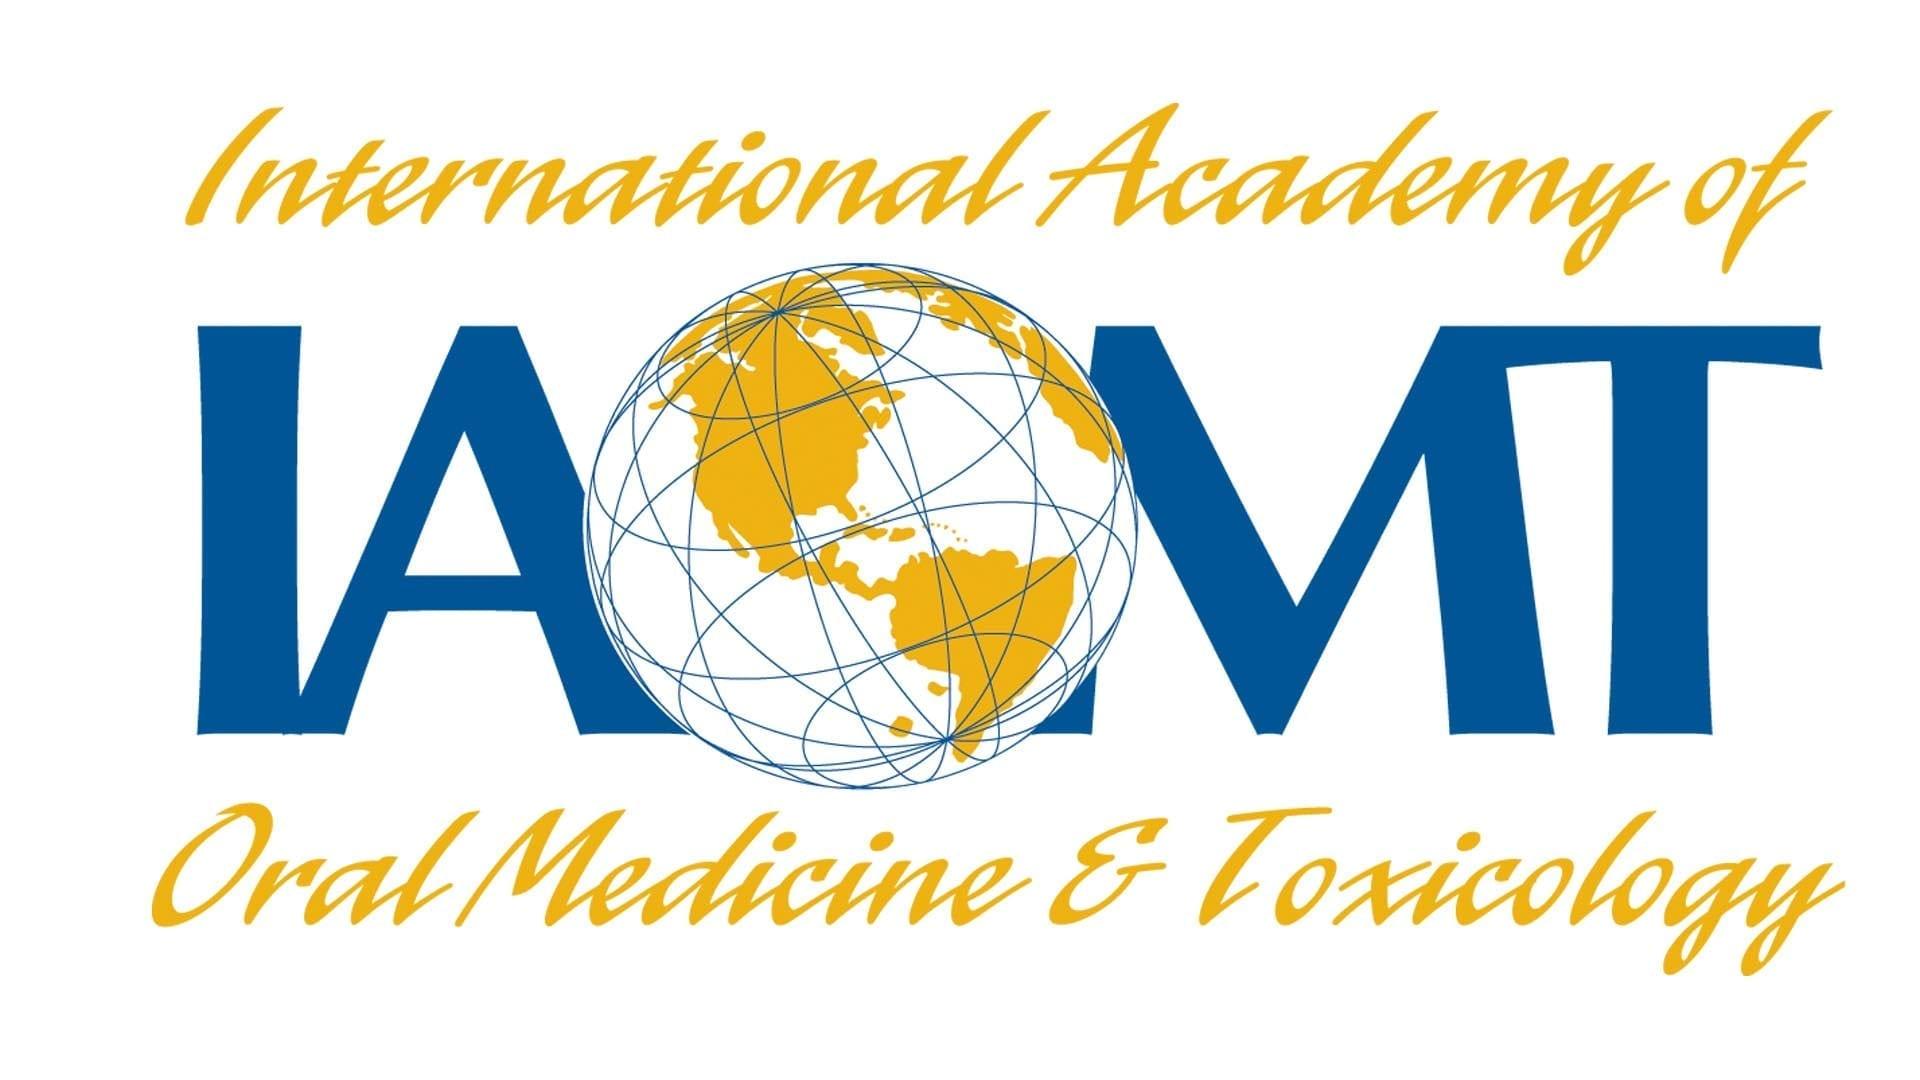 IAOMT Logo - The International Academy of Oral Medicine and Toxicology - IAOMT